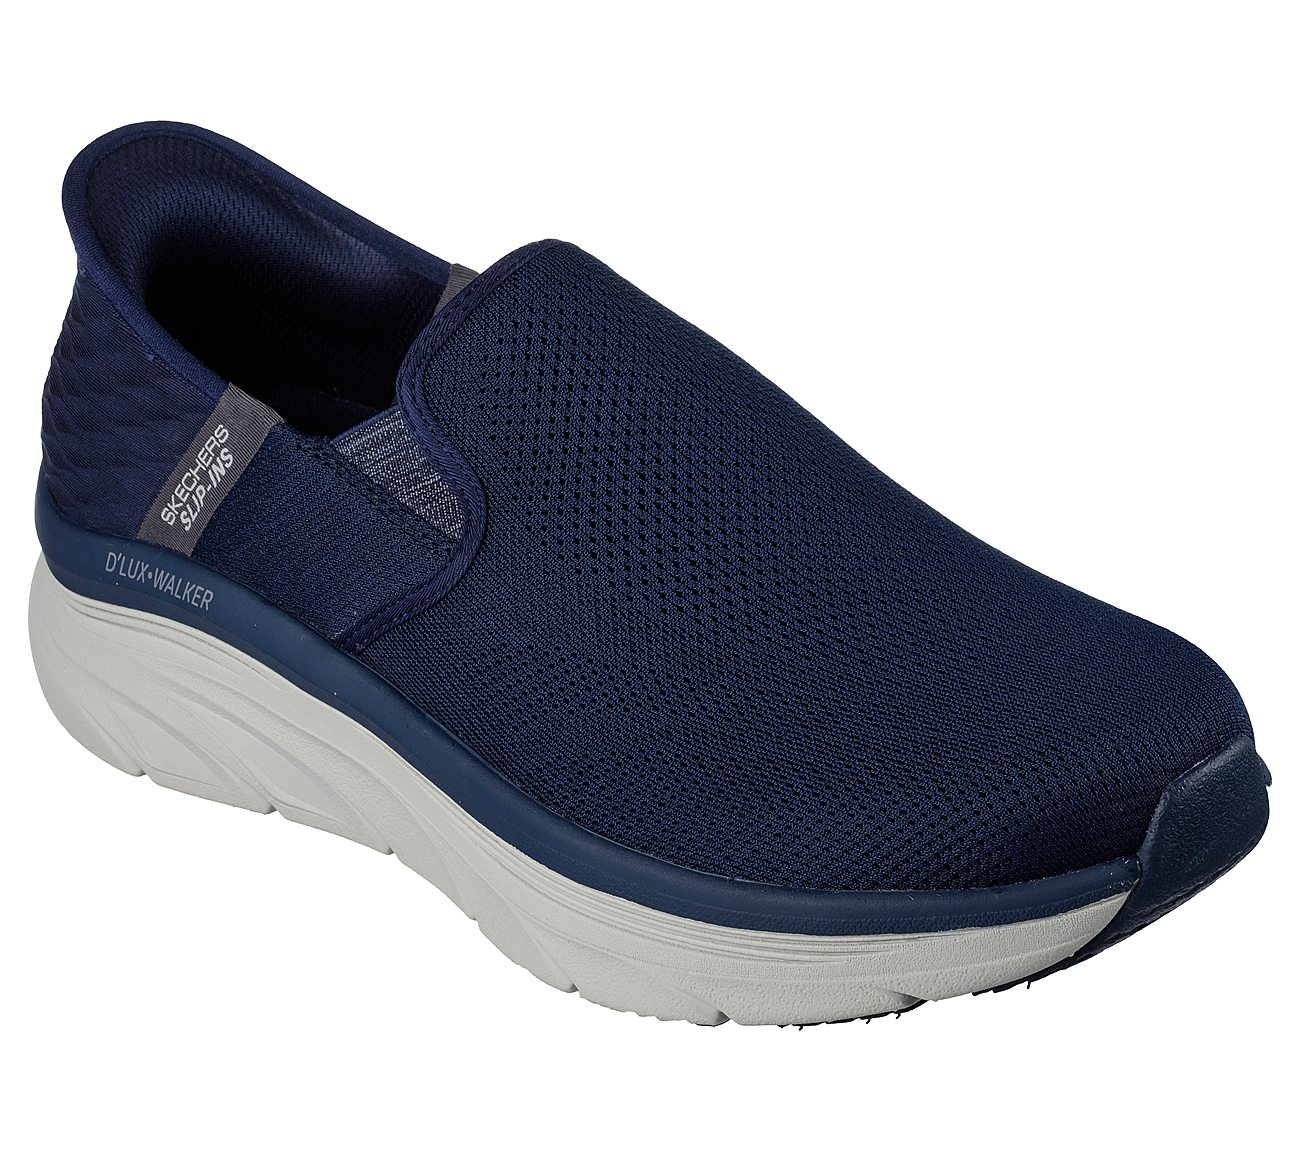 D'LUX WALKER - ORFORD, NNNAVY Footwear Right View